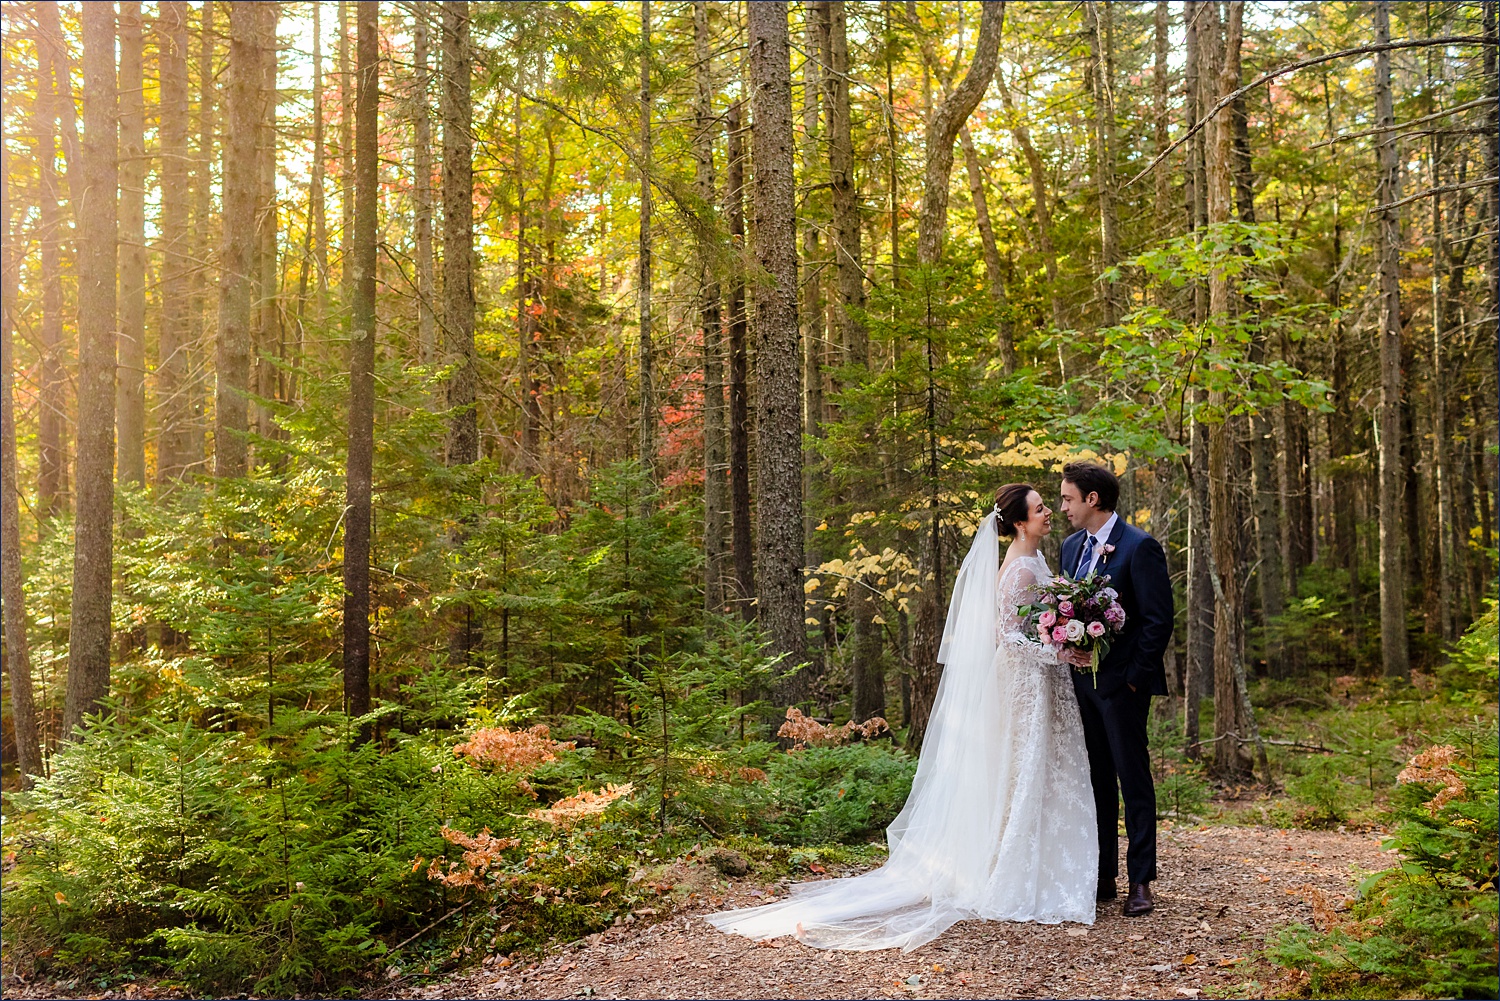 The bride and groom hang out in the woods of Spruce Point Inn in the woods of Boothbay Harbor Maine